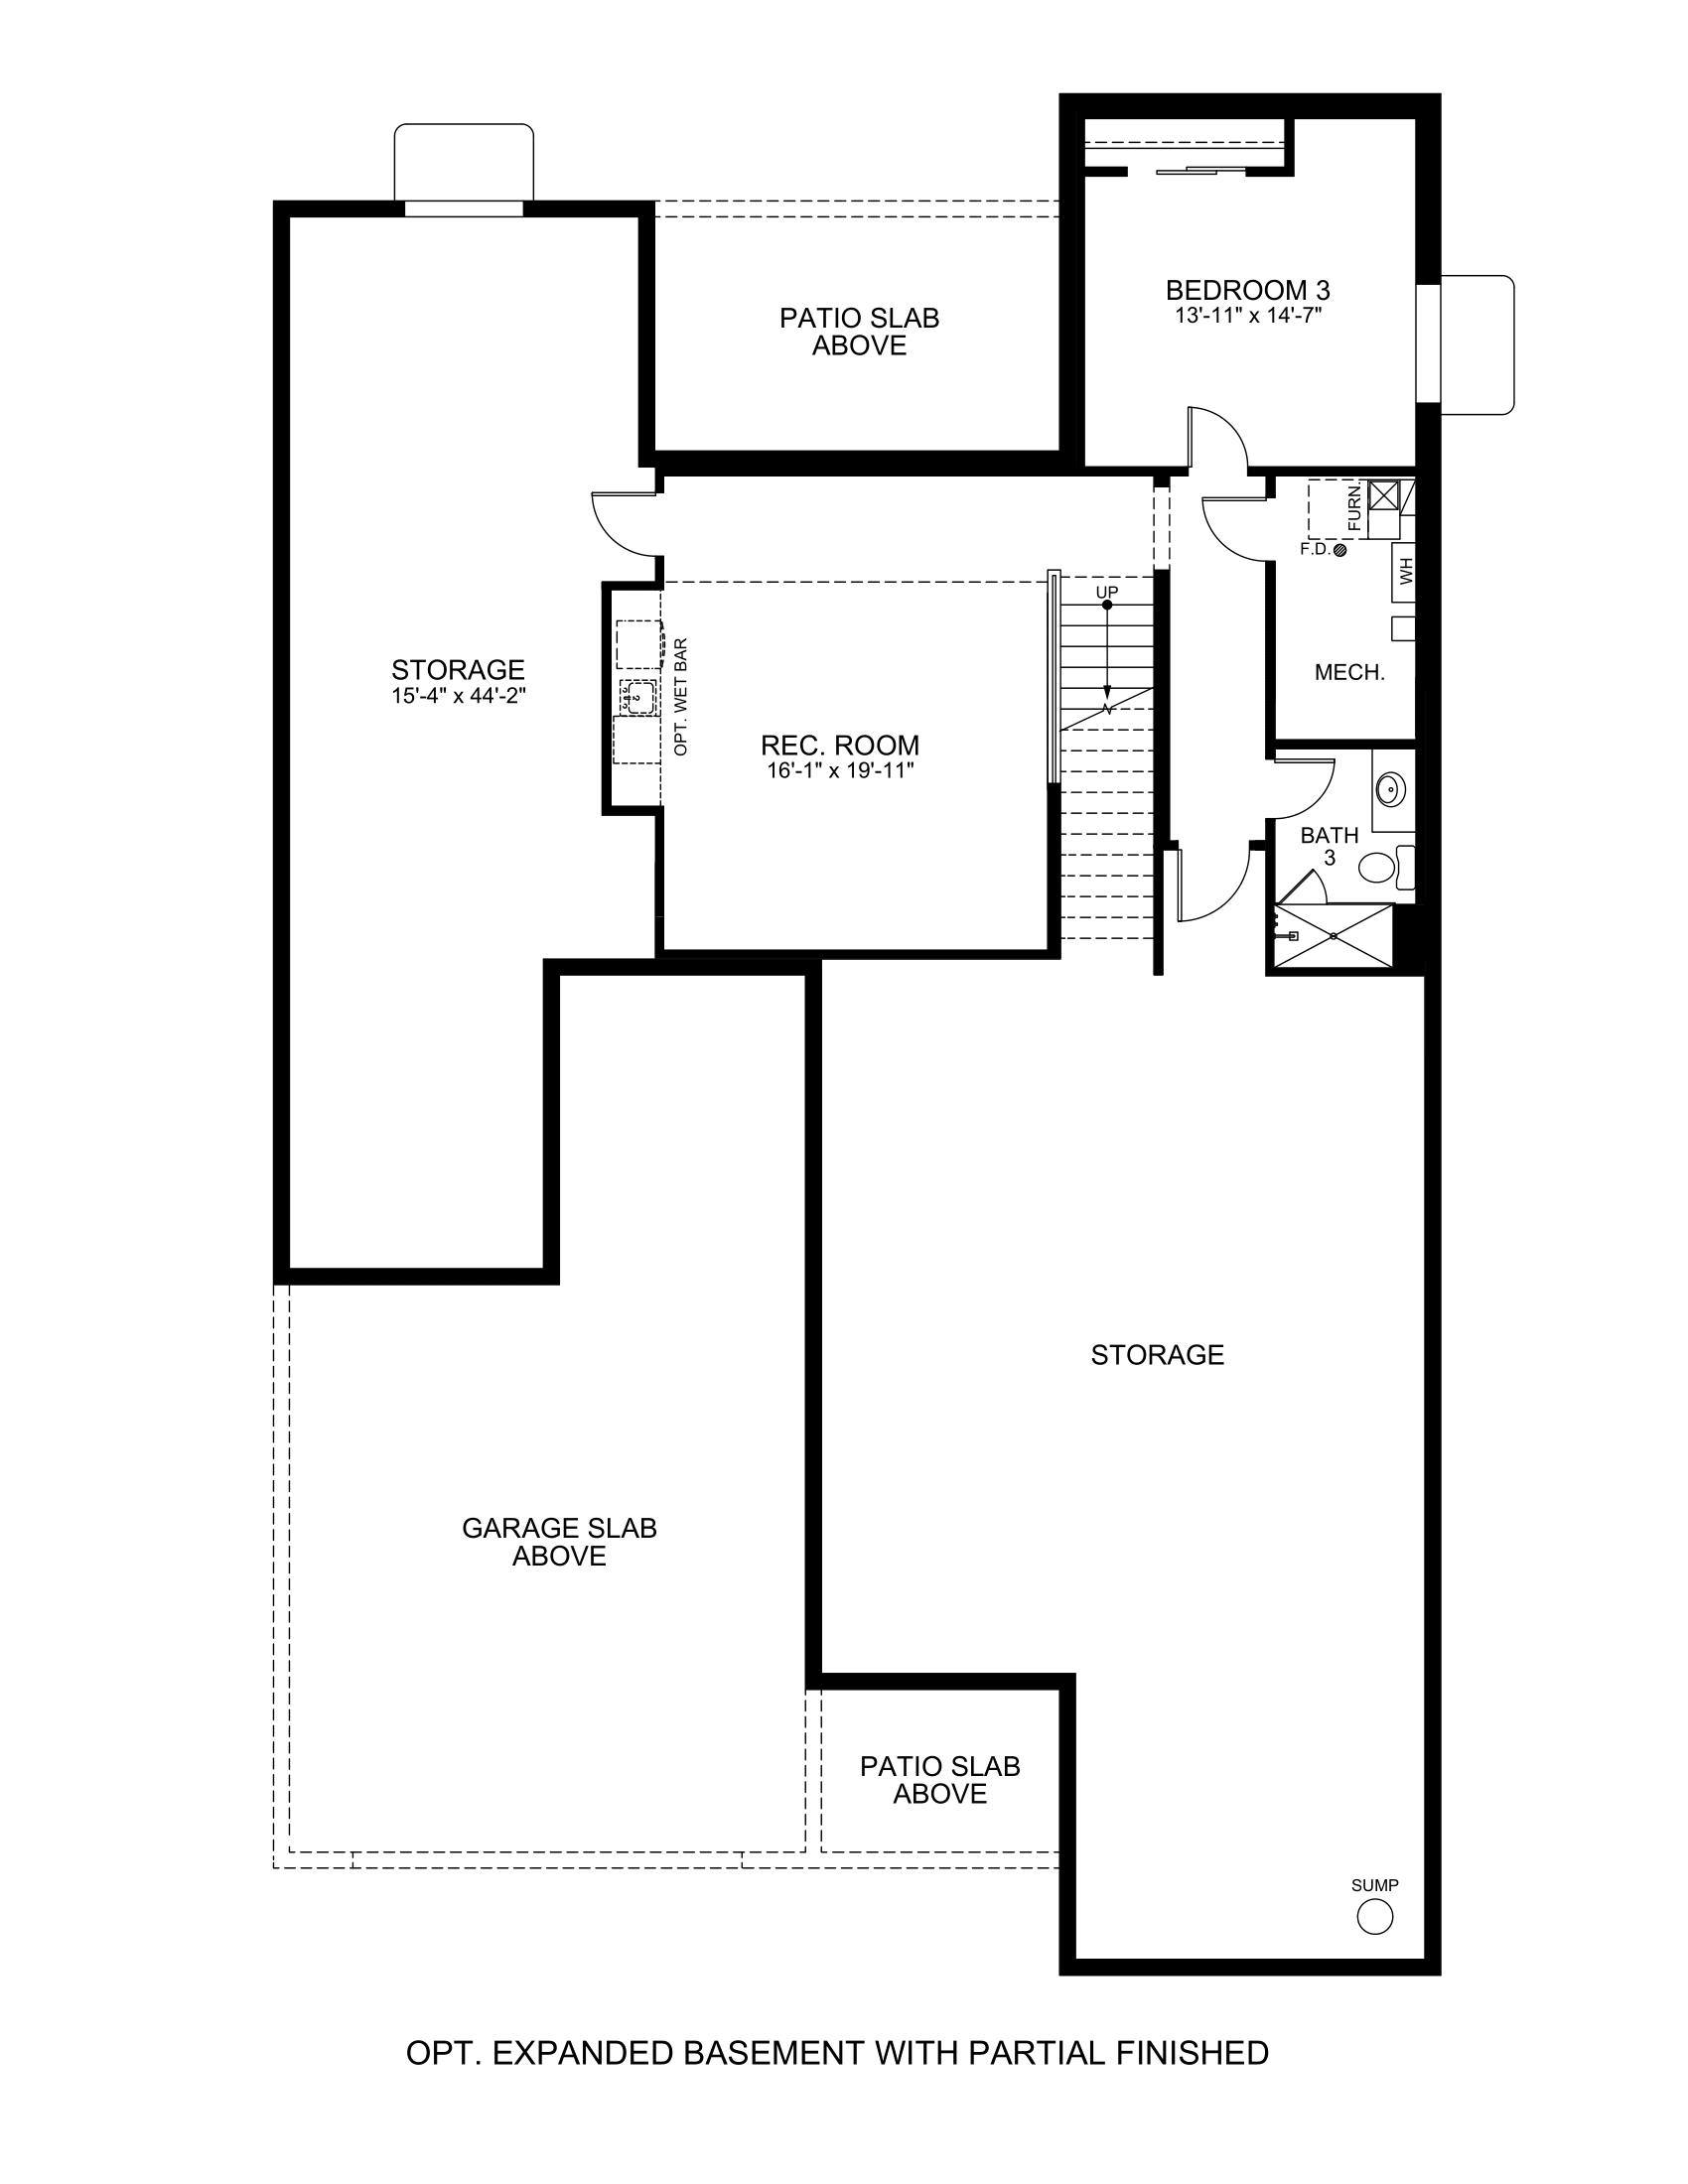 Optional Expanded Basement with Partial Finished